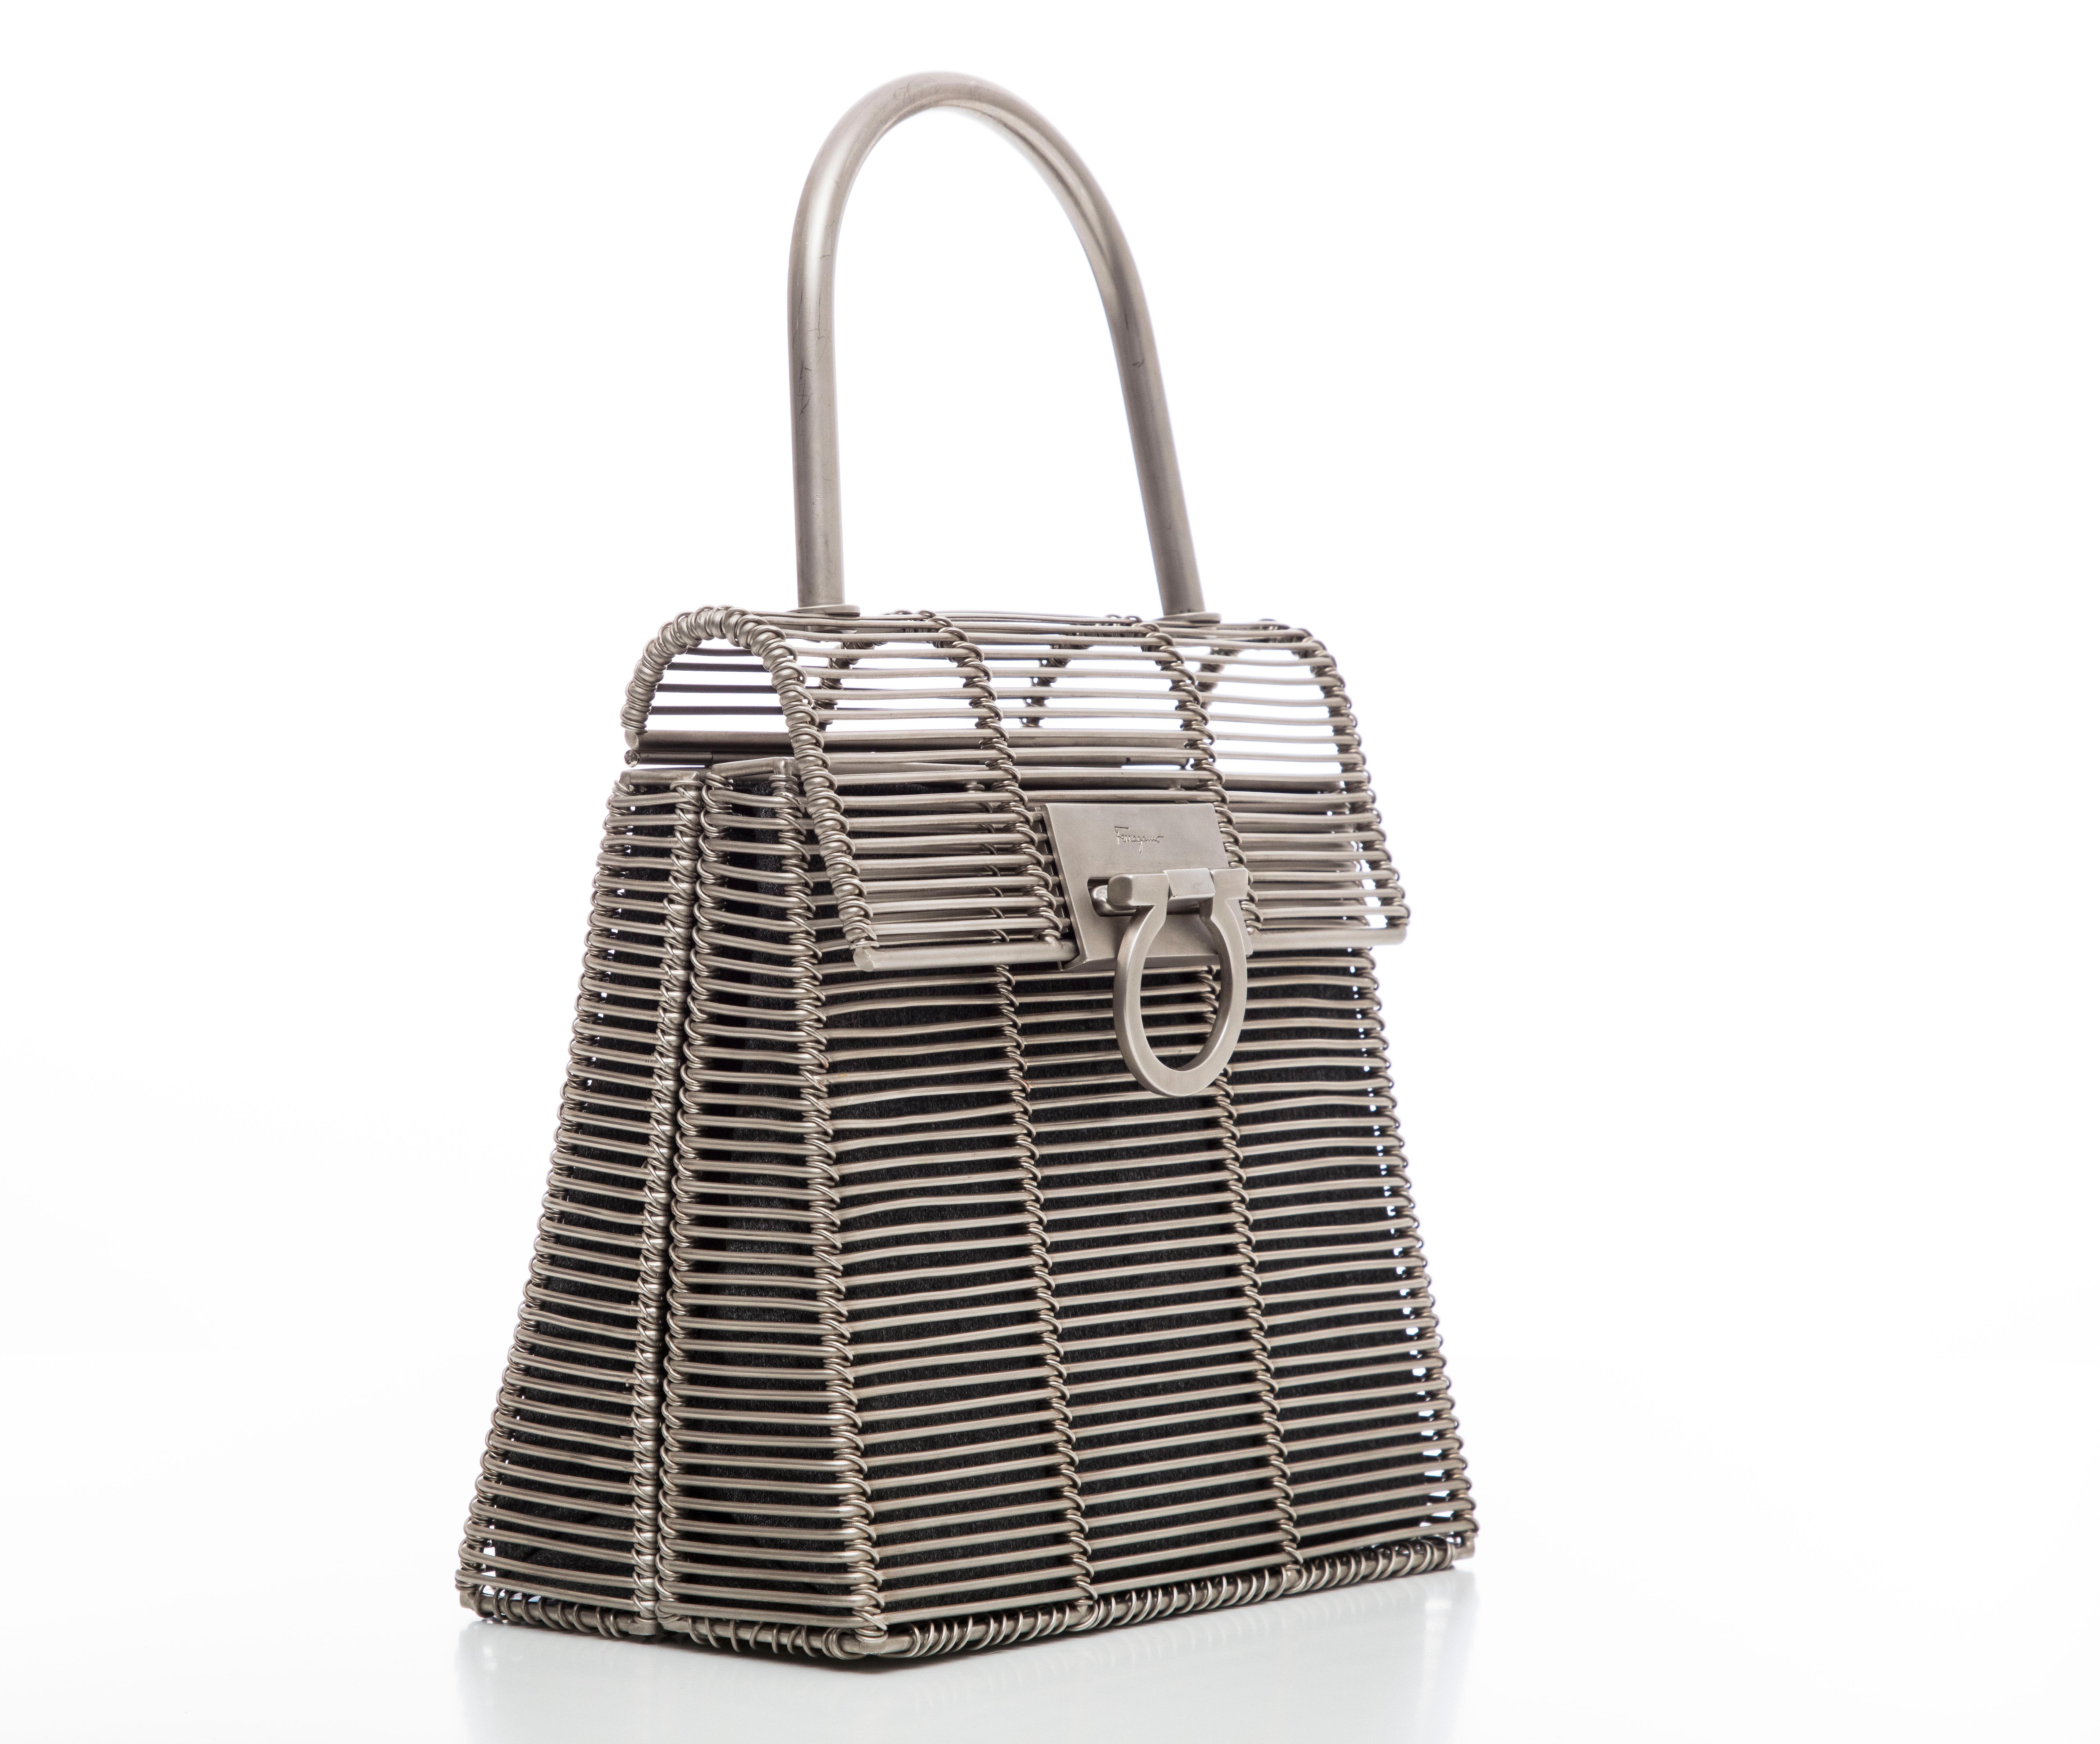  Salvatore Ferragamo, Circa: 1999 classic metal bag with Gancino magnetic fastening, tonal hardware, single rolled top handle, black woven lining with single pocket at interior wall.

Published Skira: Salvatore Ferragamo 